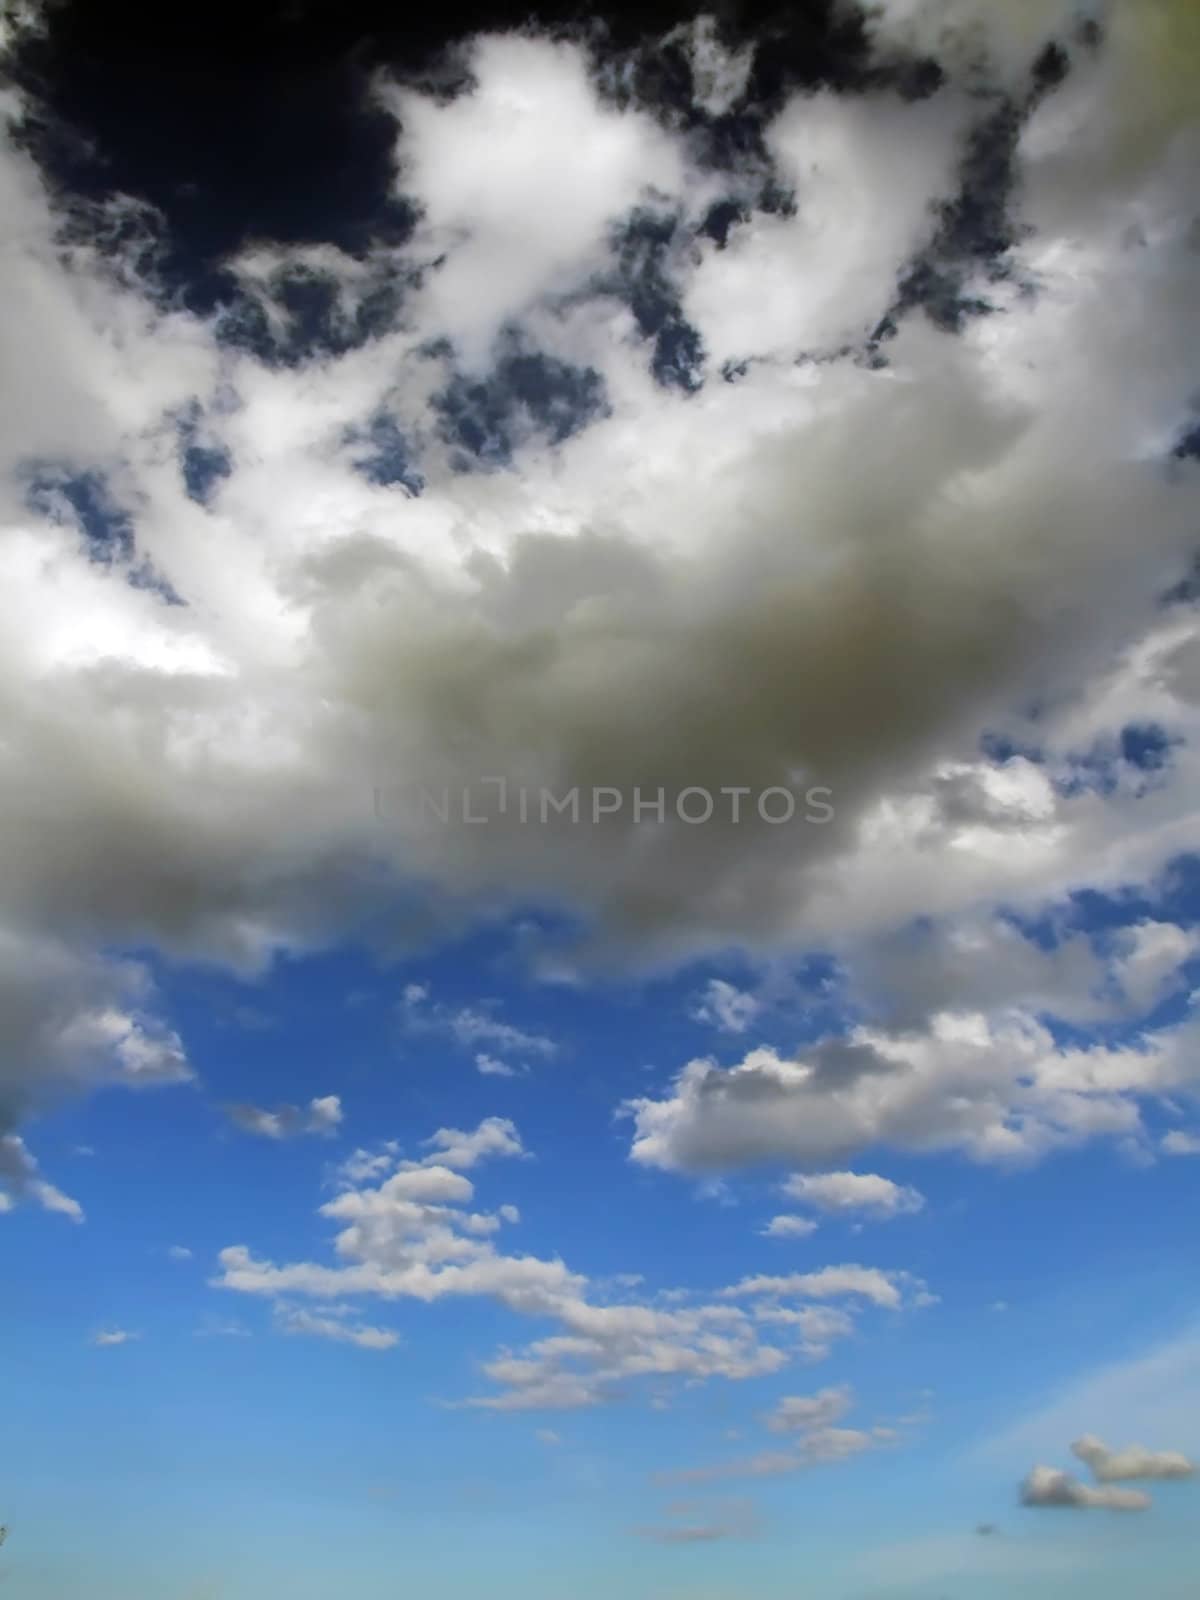 Clouds looming over the horizon with deep blue sky in background